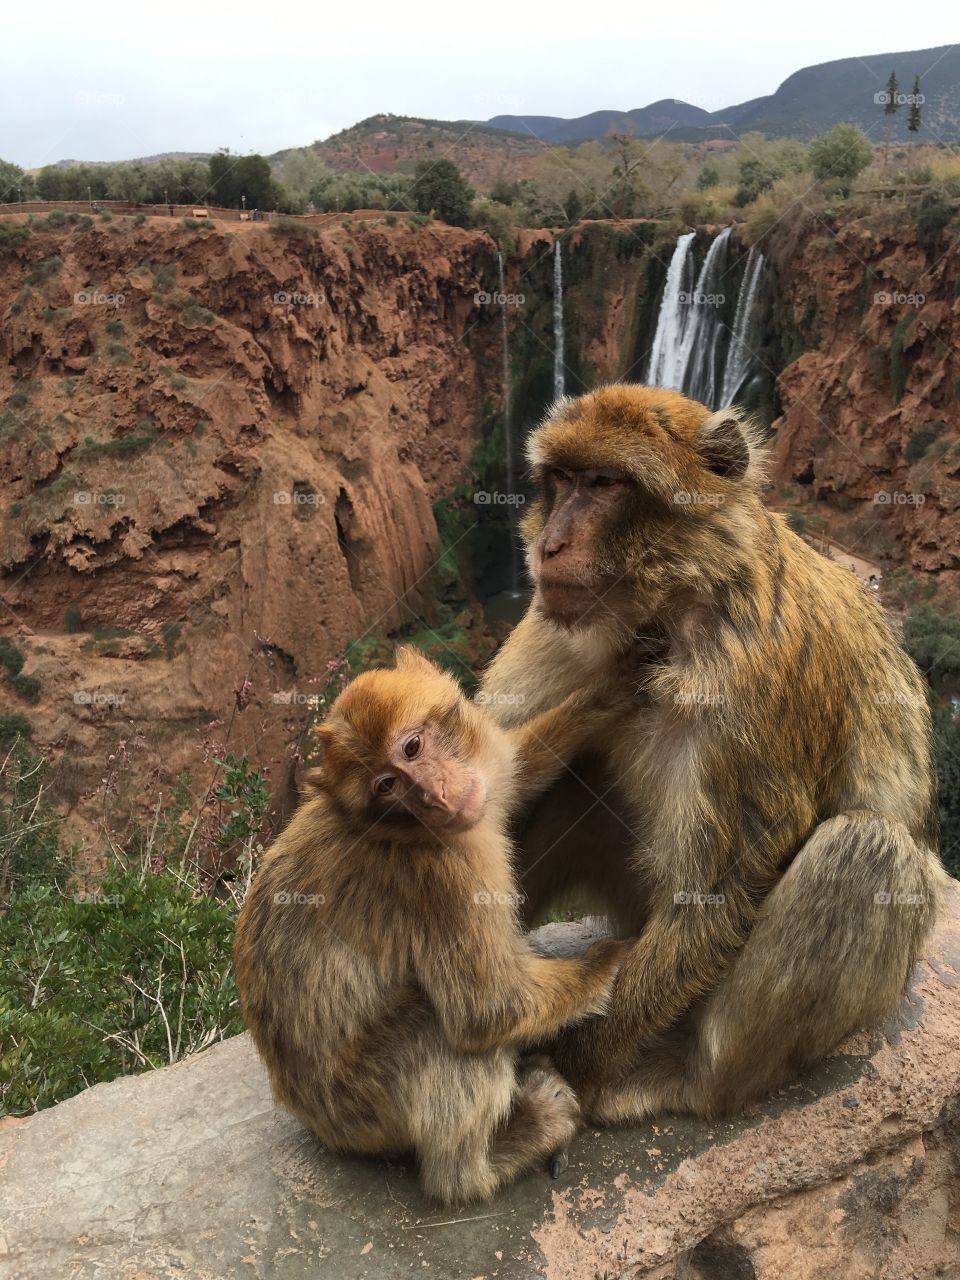 Monkeys at ouzoud falls that interact with humans 